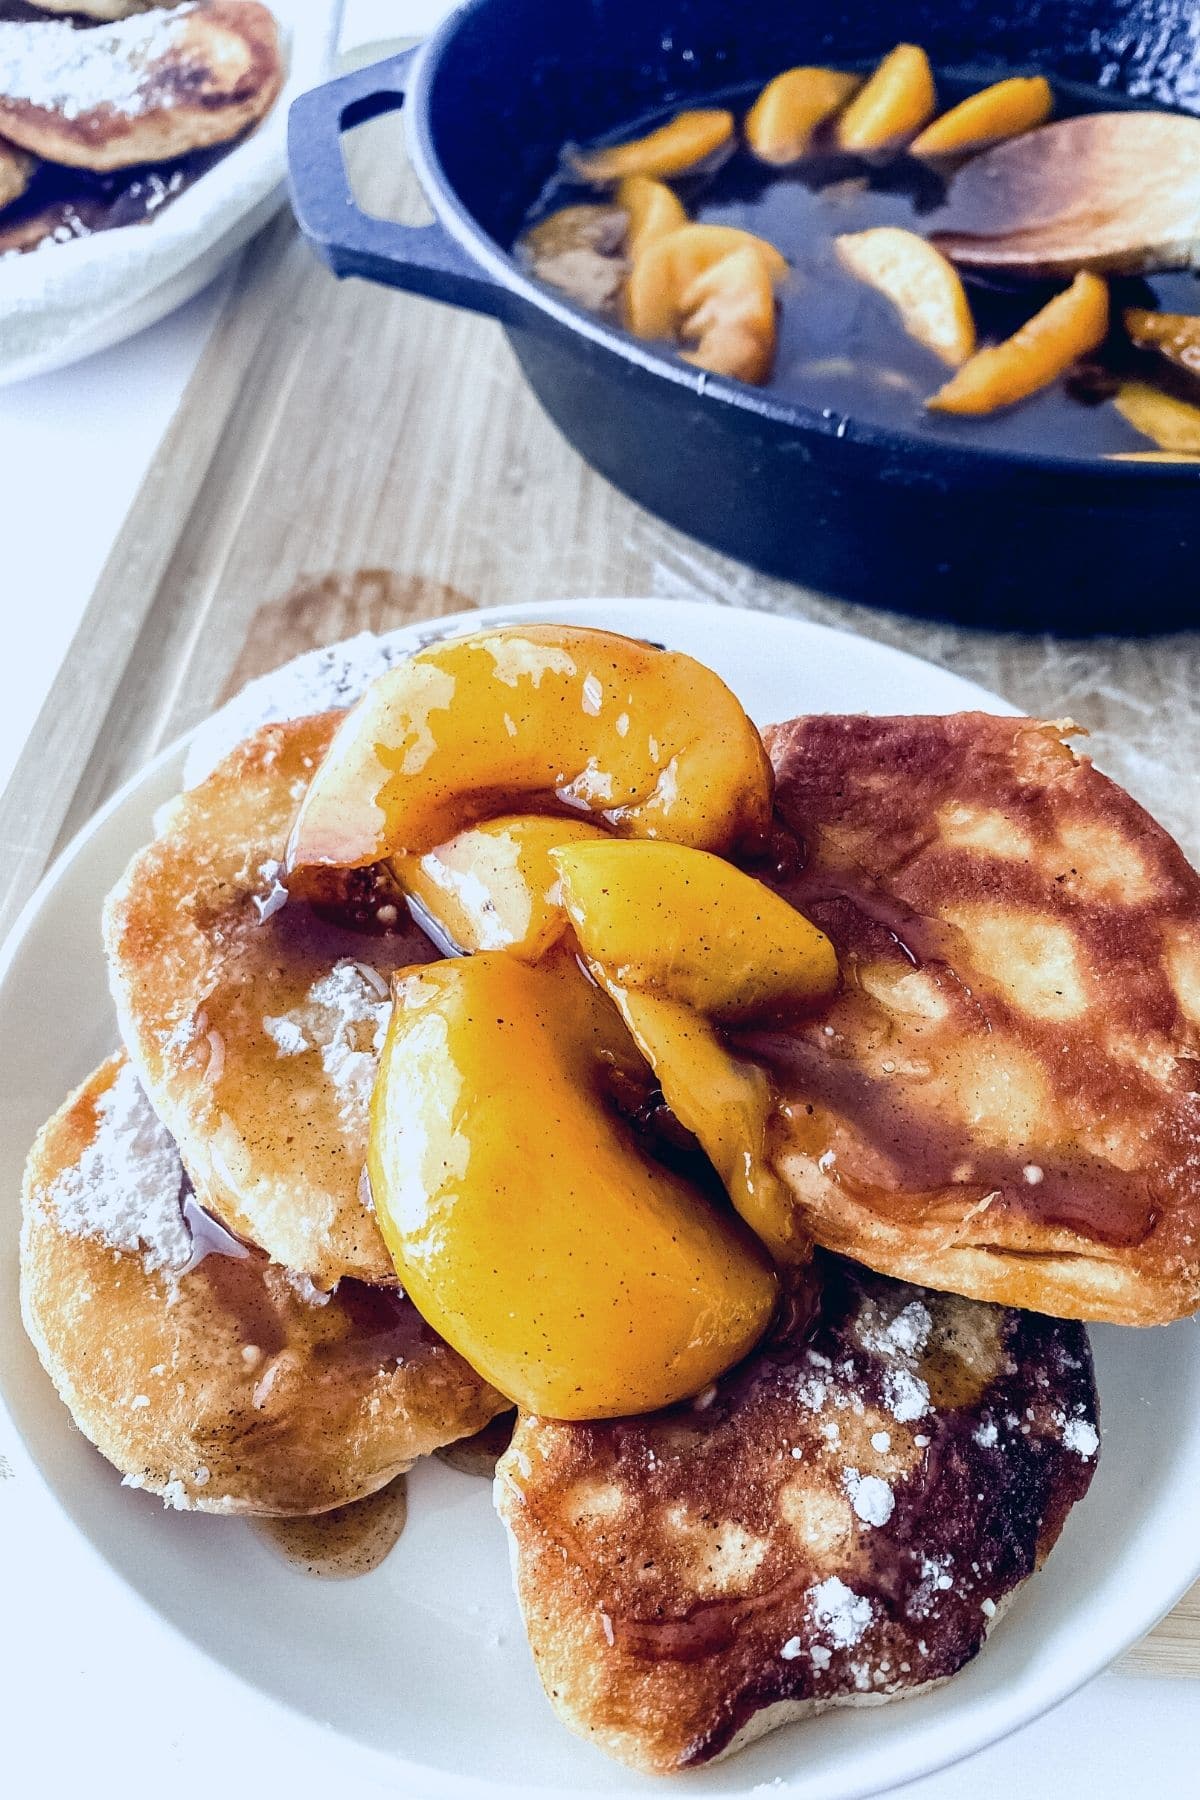 Plate of biscuits topped with peaches